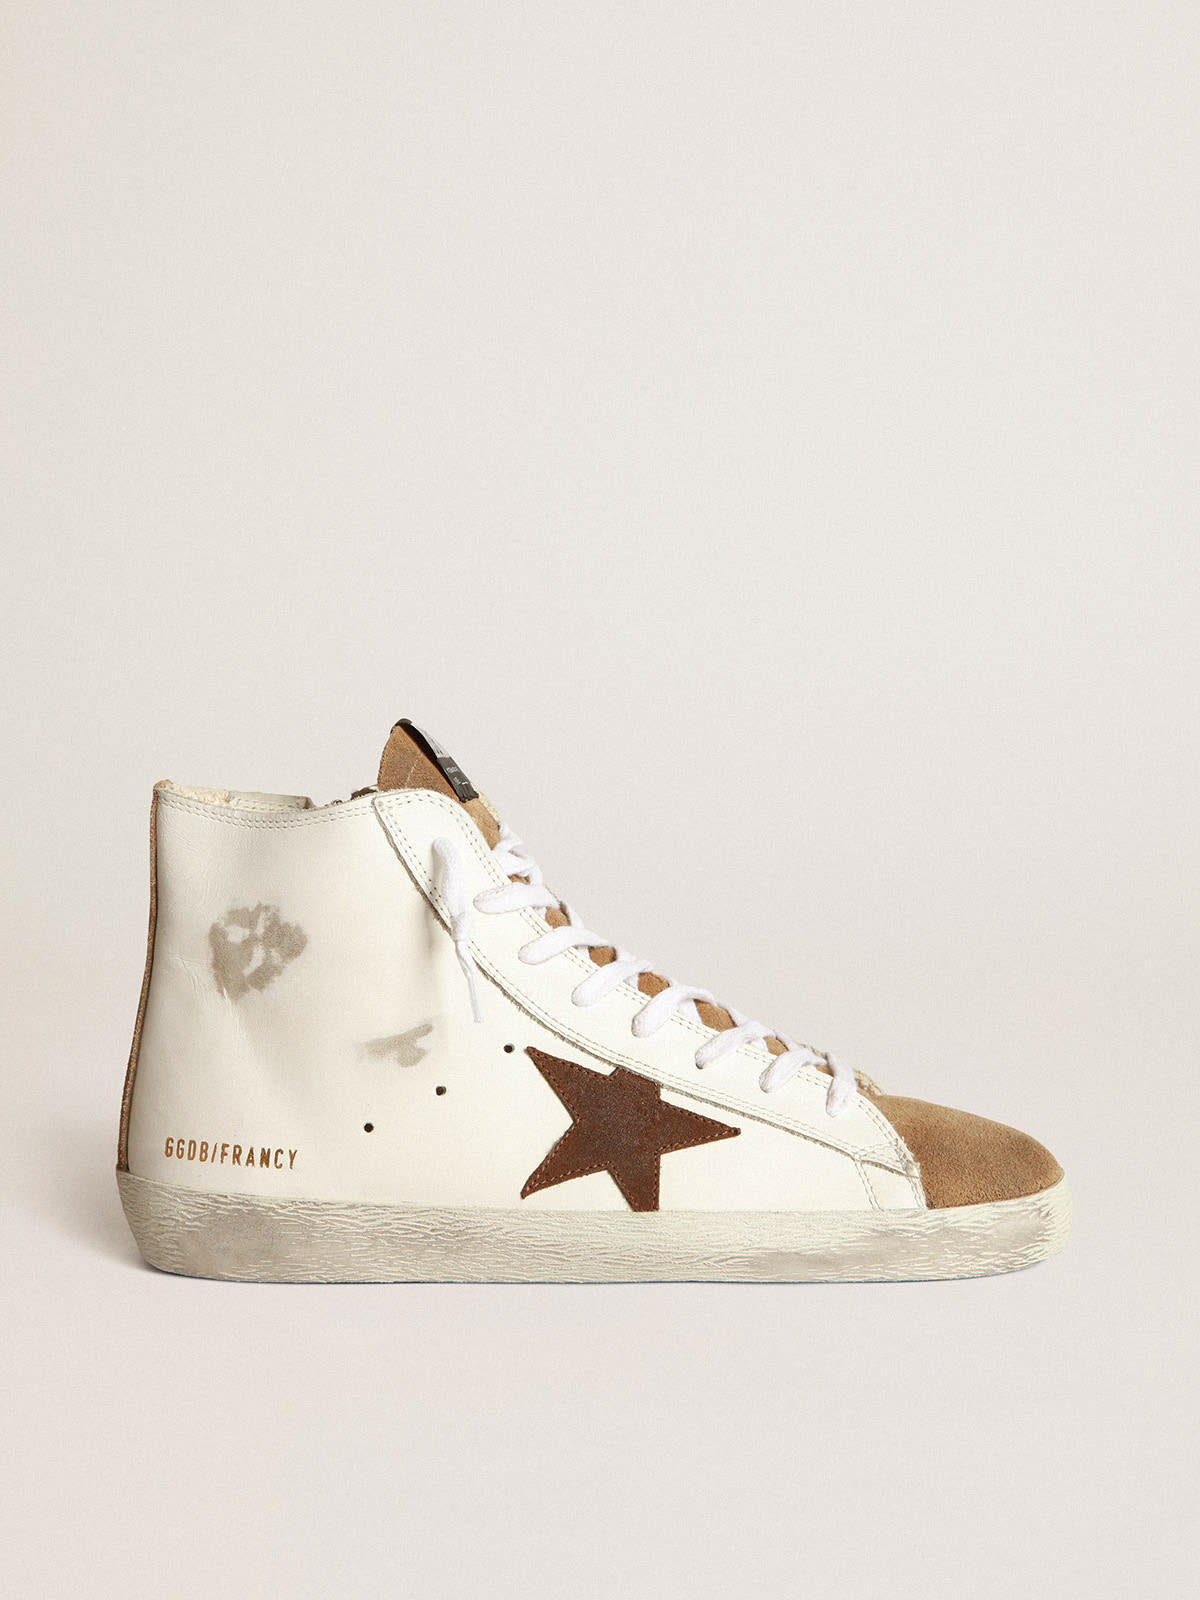 Francy sneakers in nude suede and white leather with contrast star